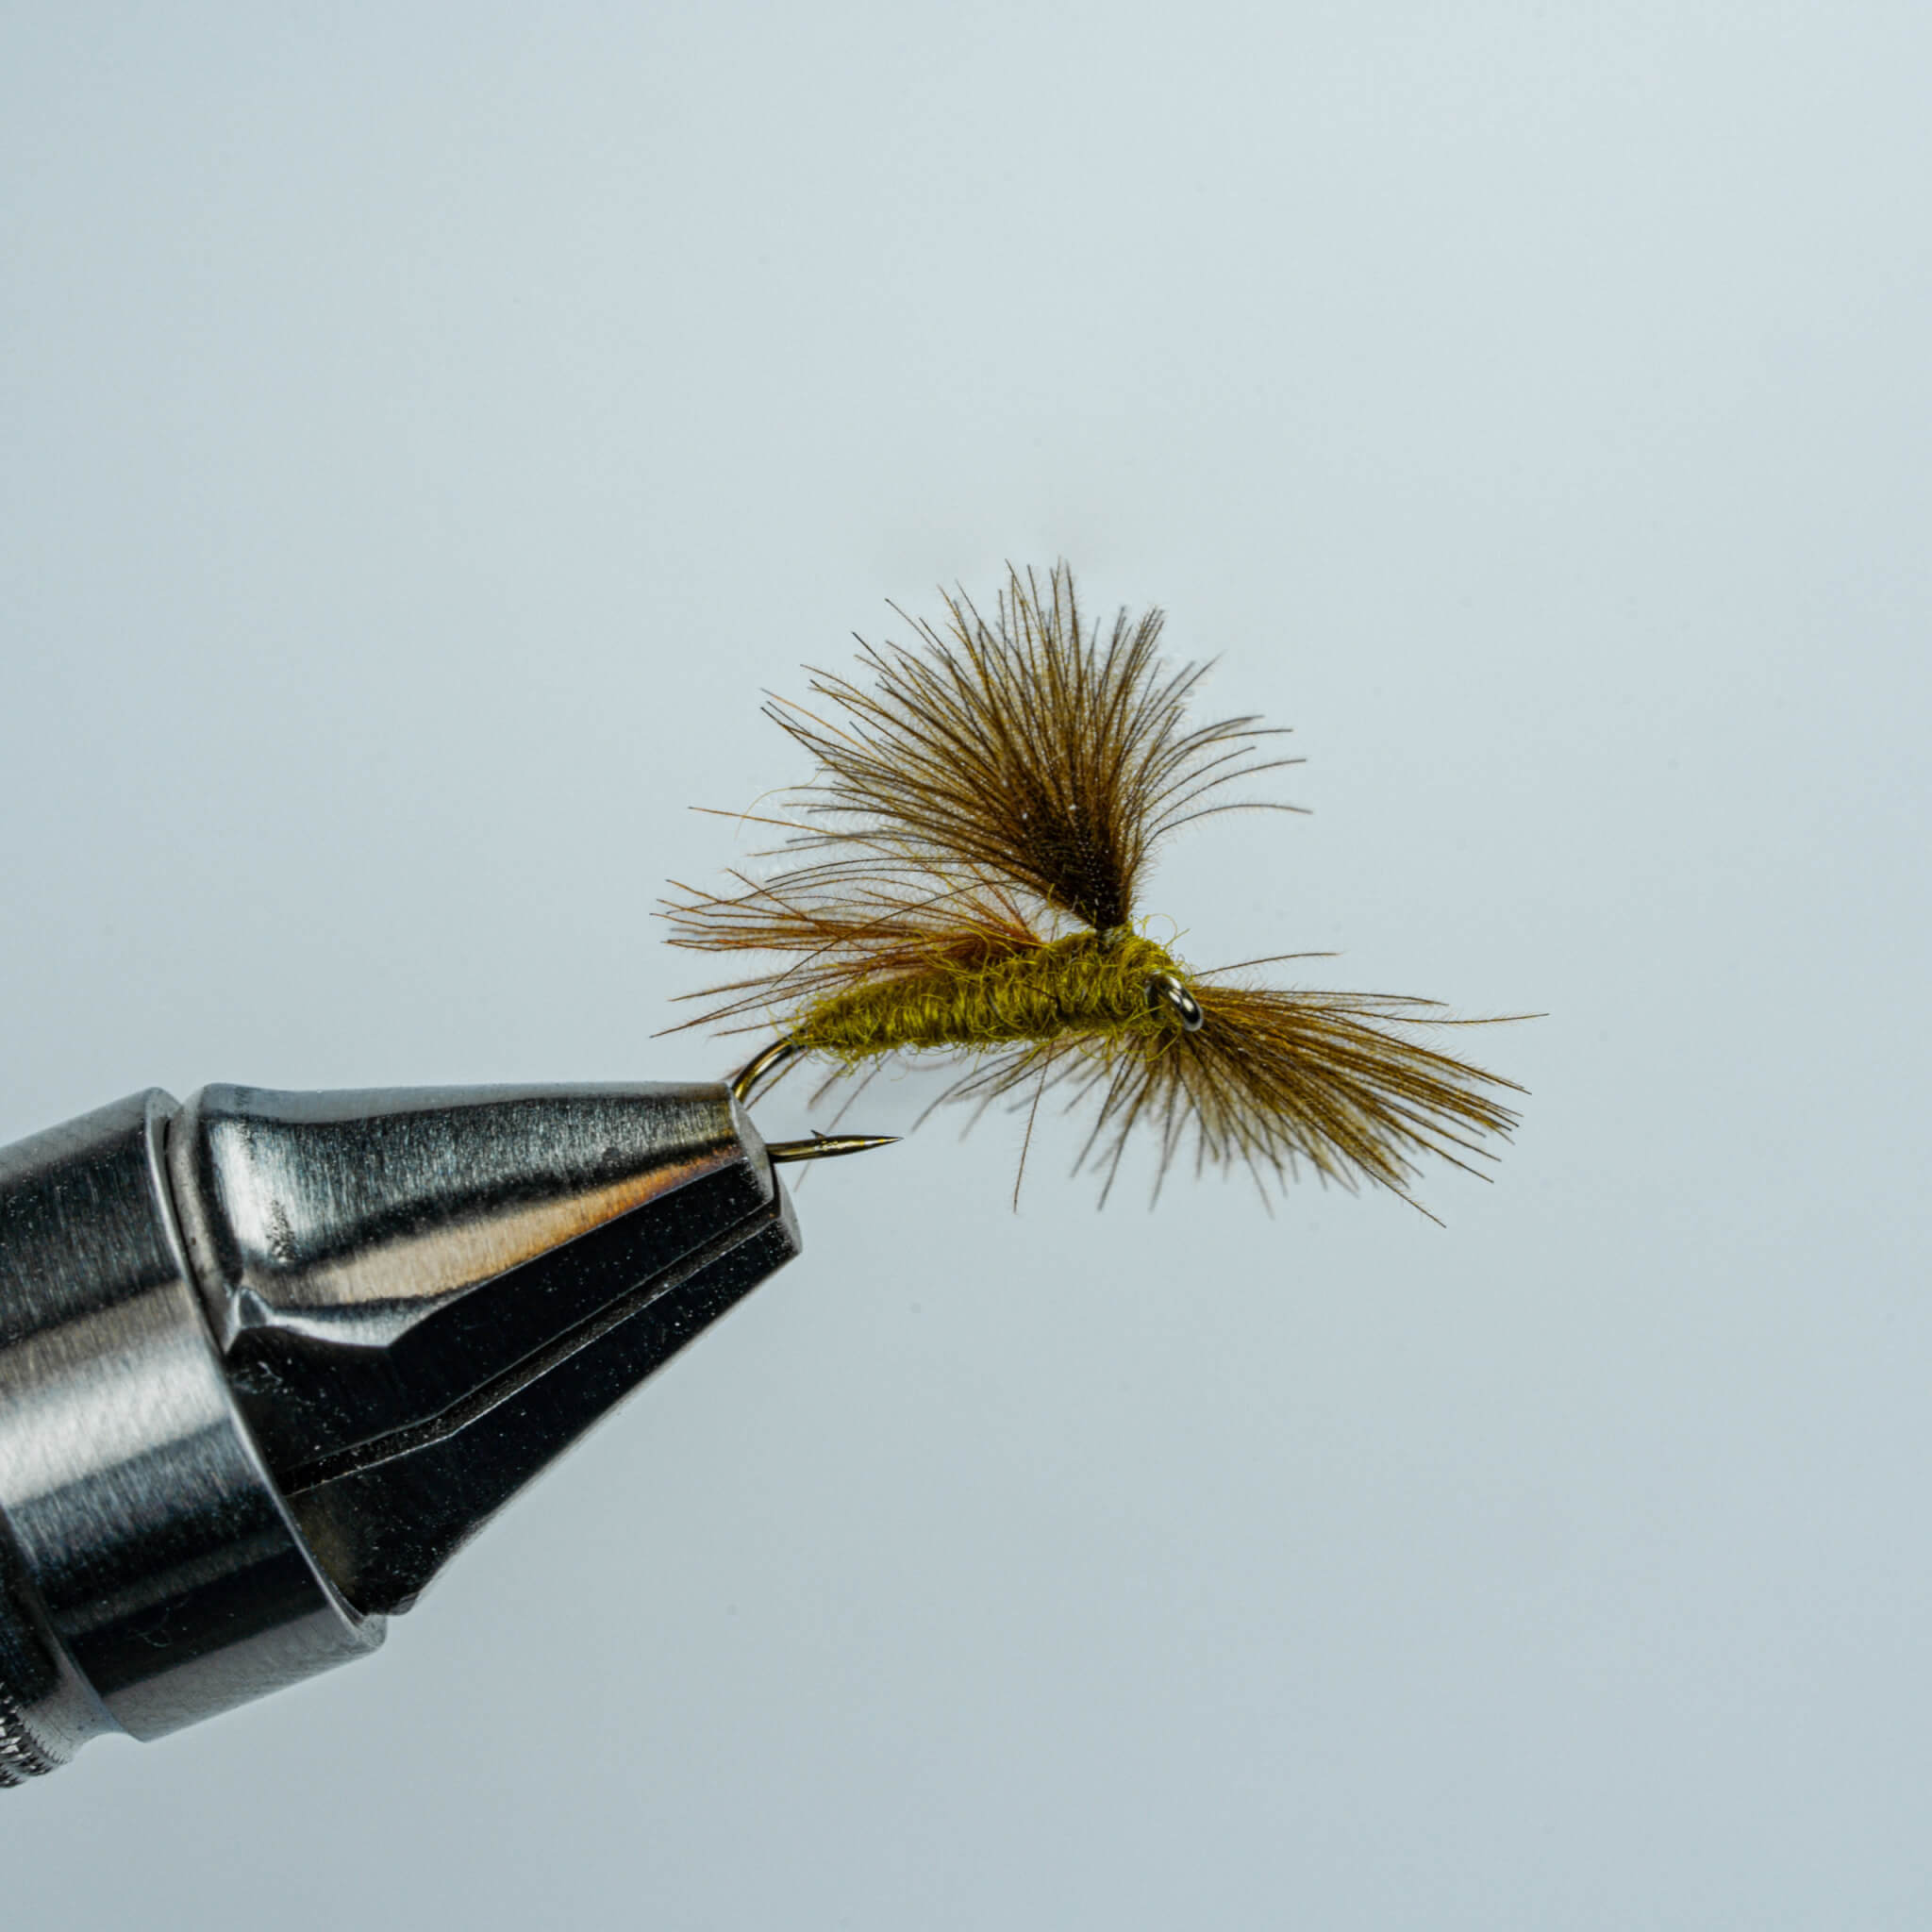 How To Use CDC Flies - The Missoulian Angler Fly Shop